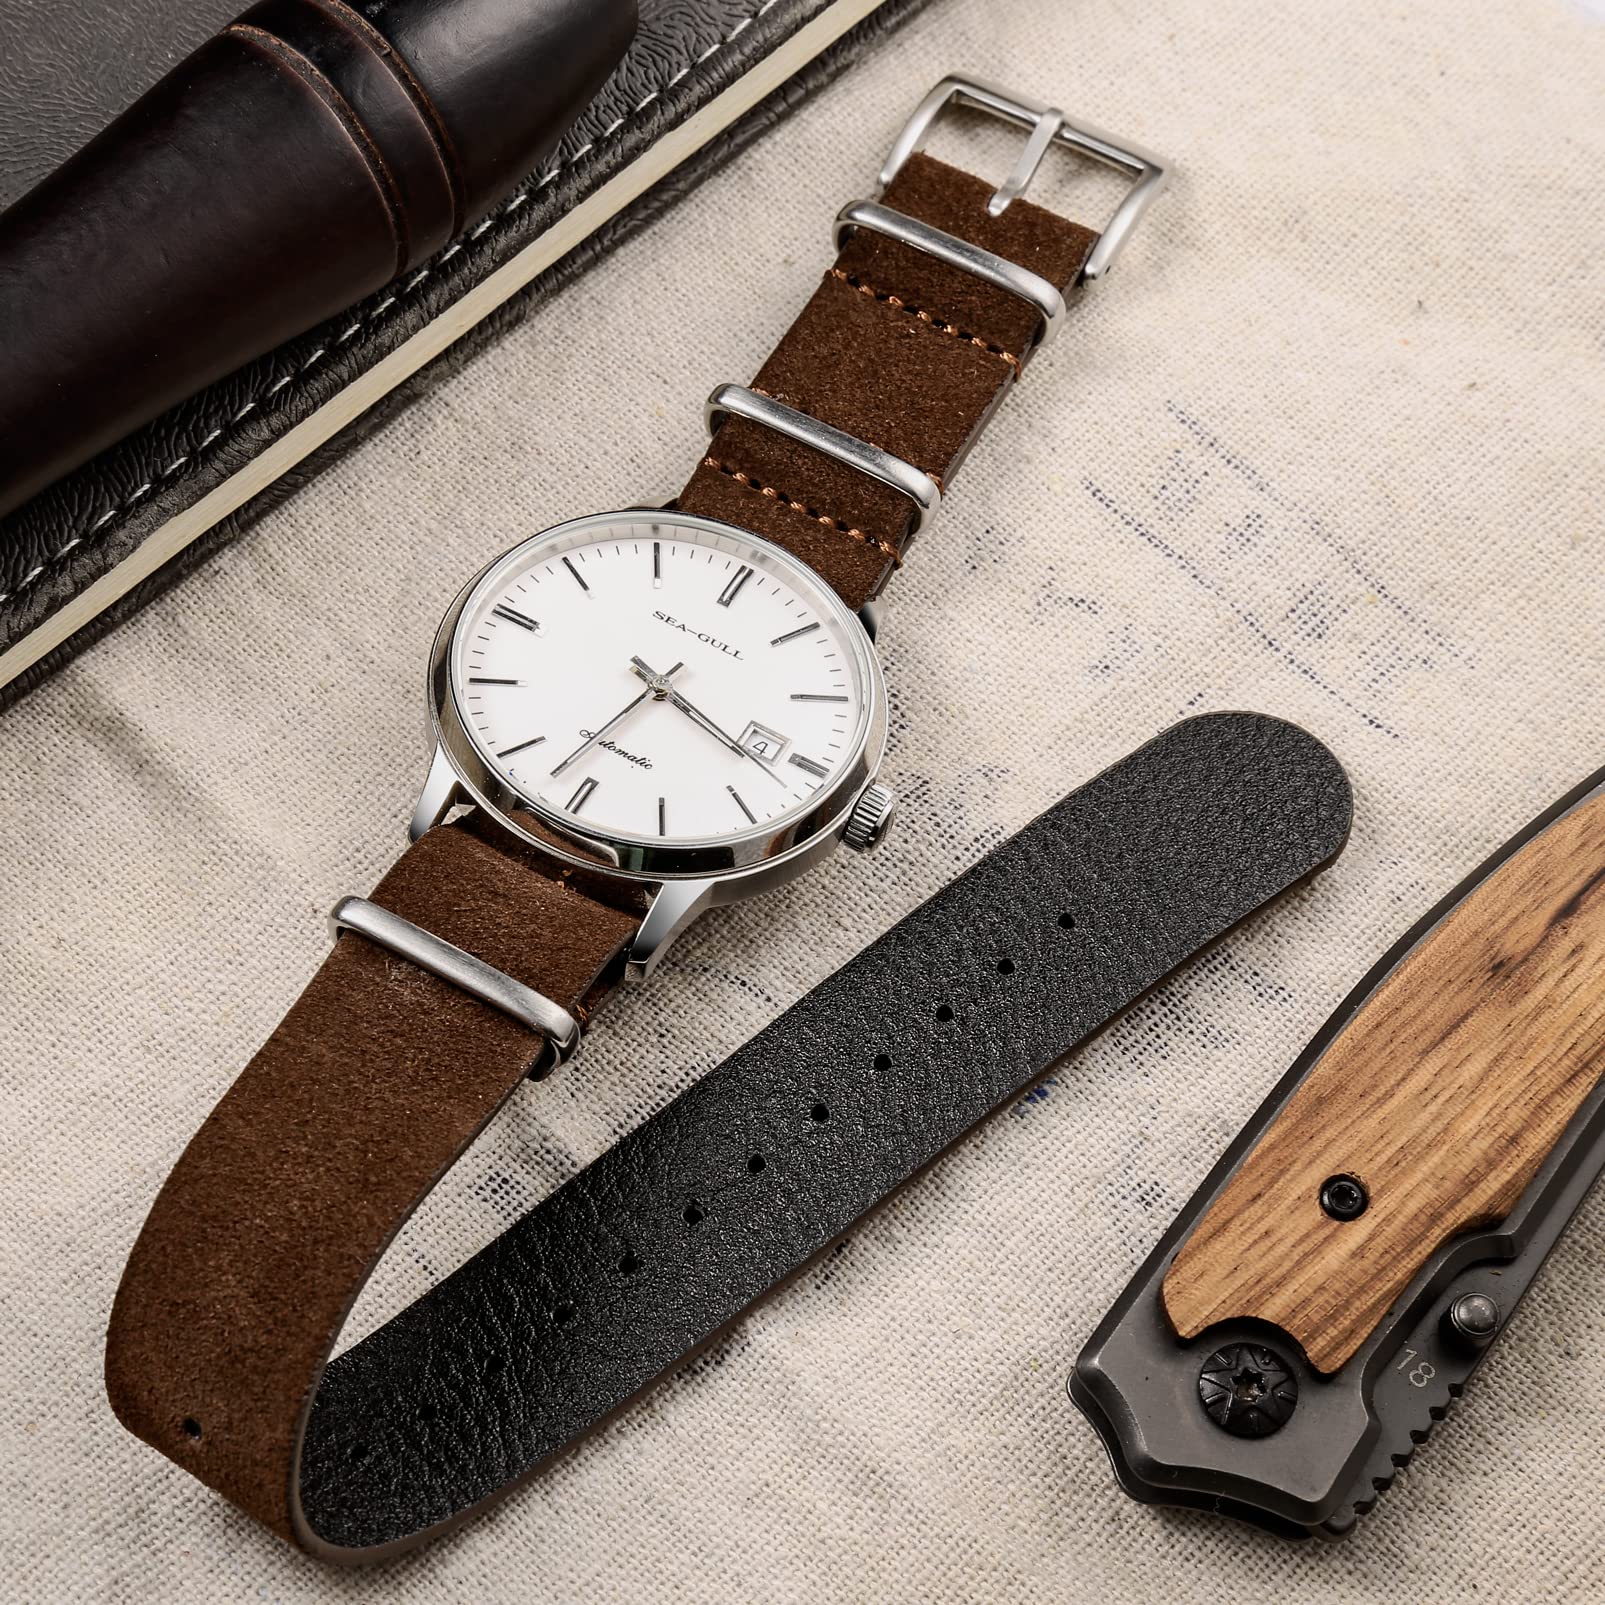 torbollo Suede Leather Watch Band, Style One-Piece Military Watch Strap Vintage Tone 18 20 22mm Replacement Wrap for Men Women